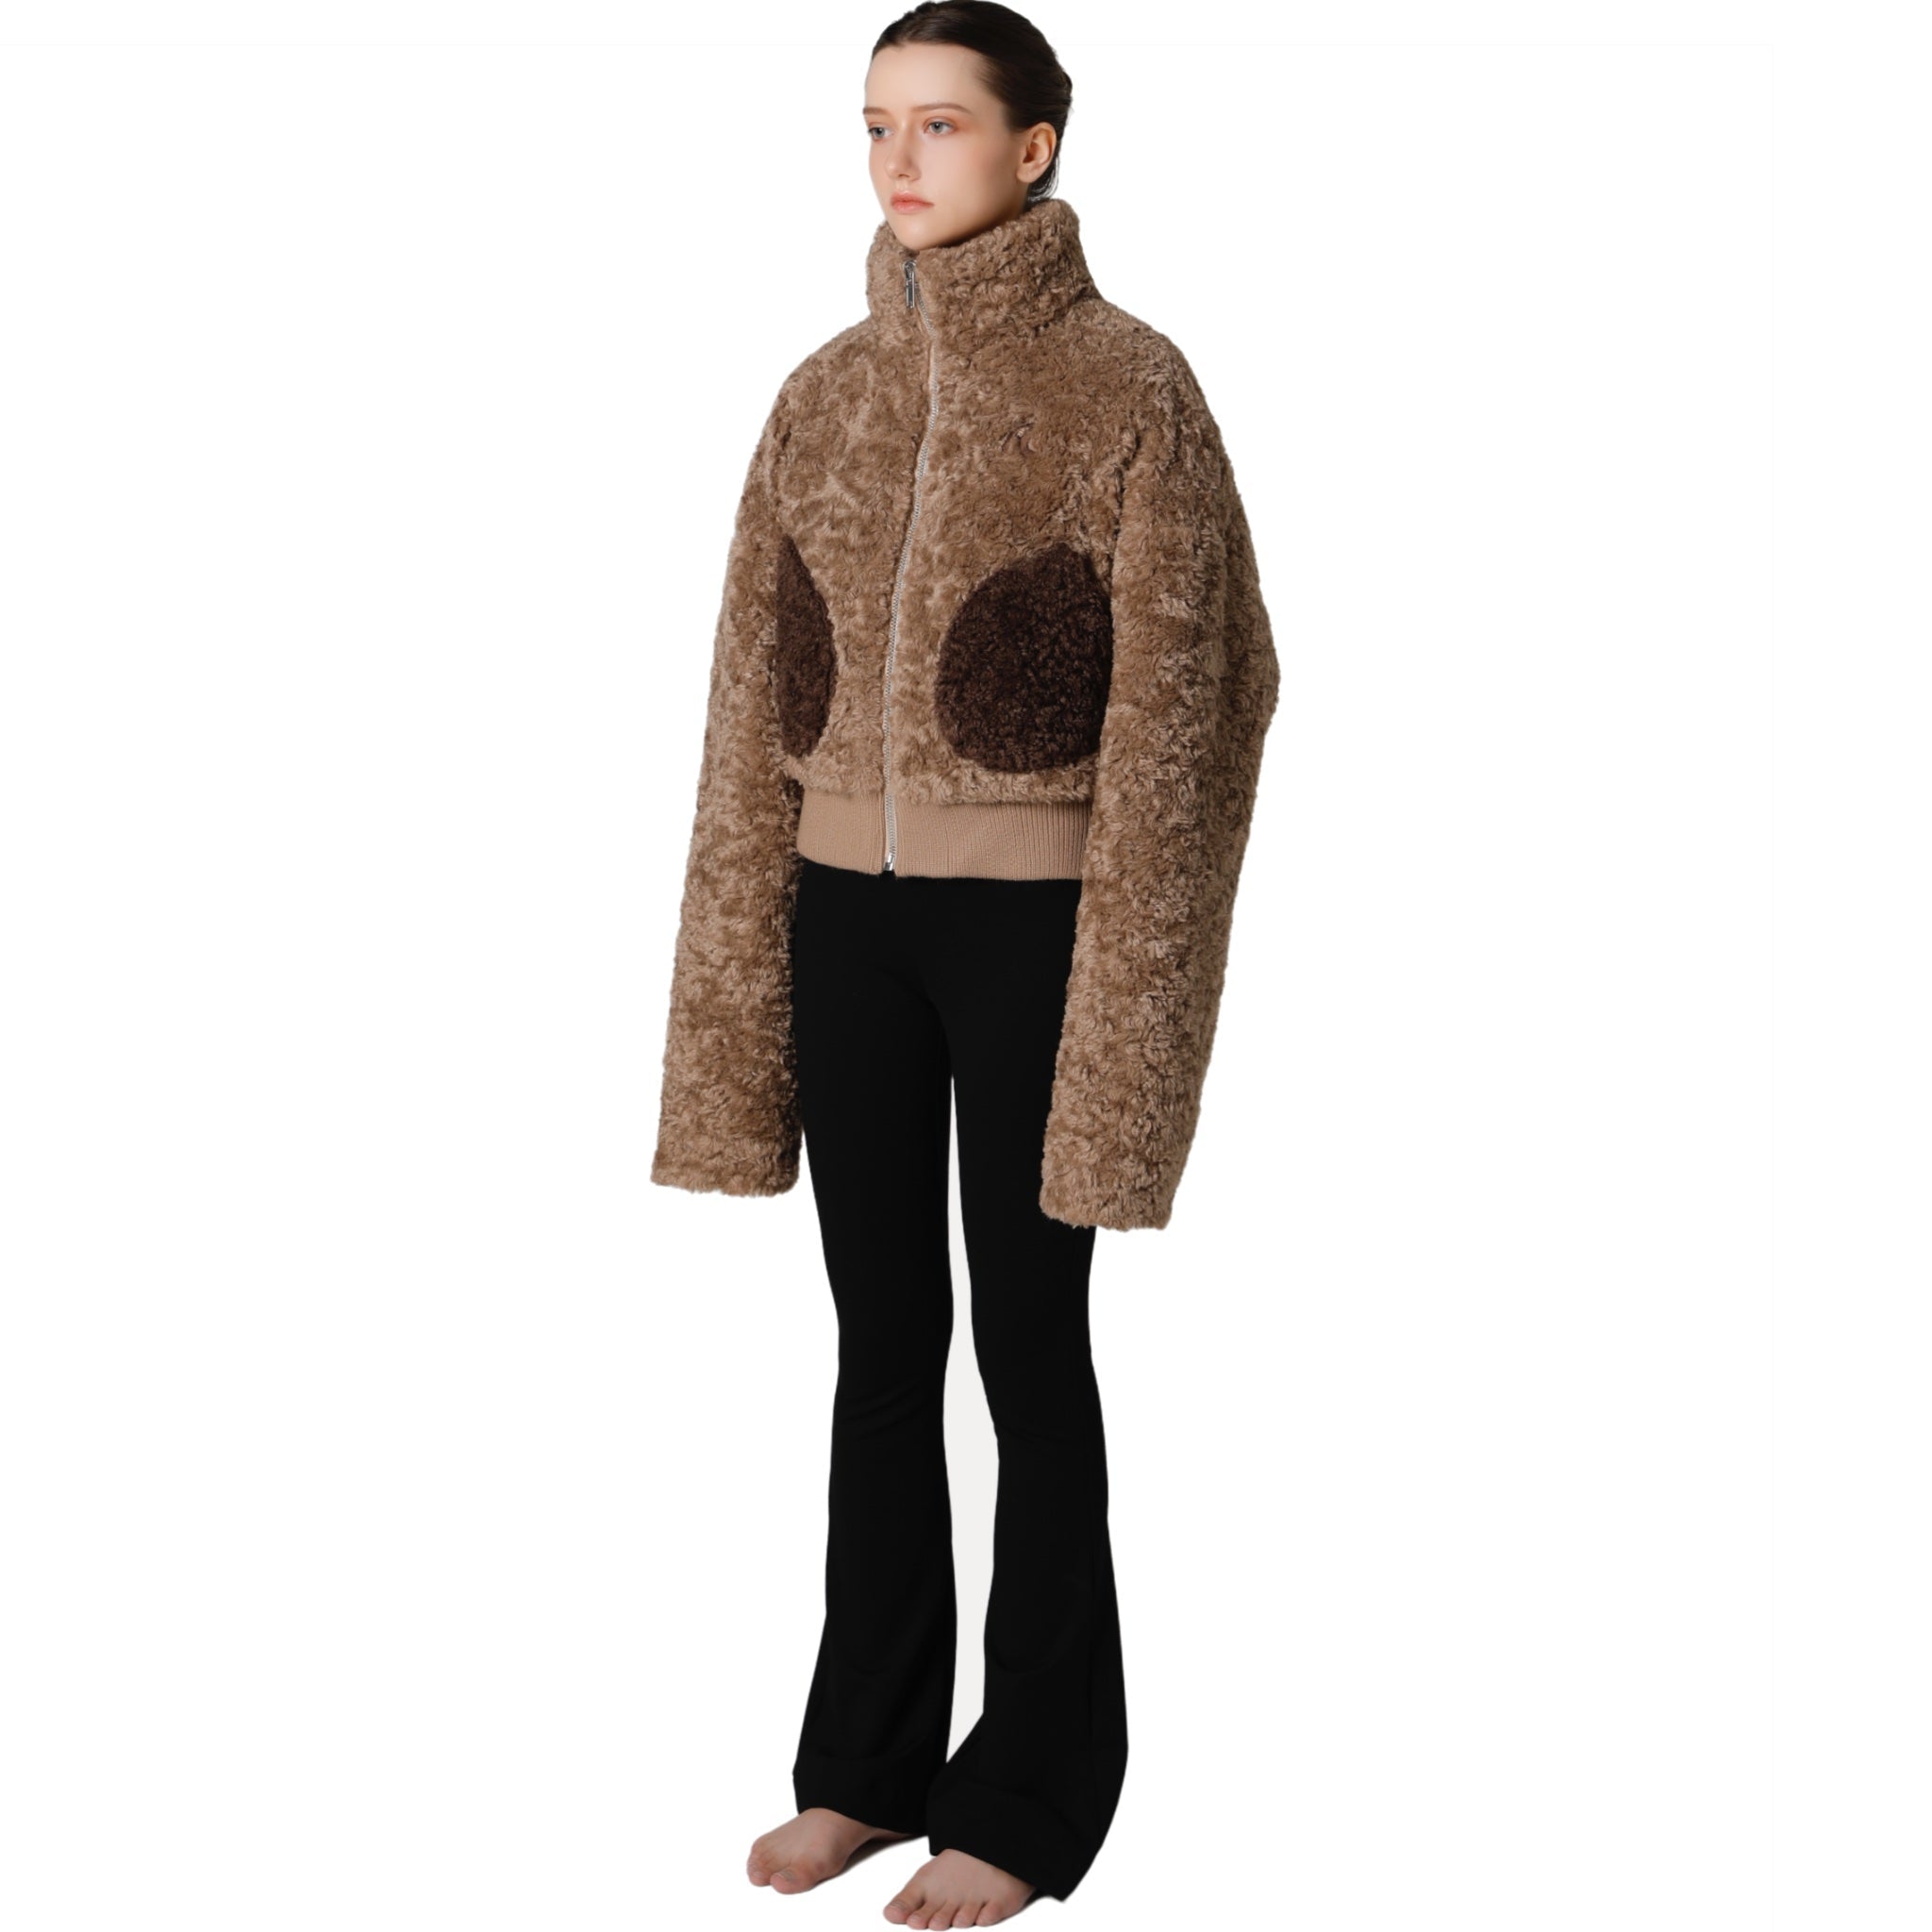 AIN'T SHY Brown Fluffy Short Jacket | MADA IN CHINA